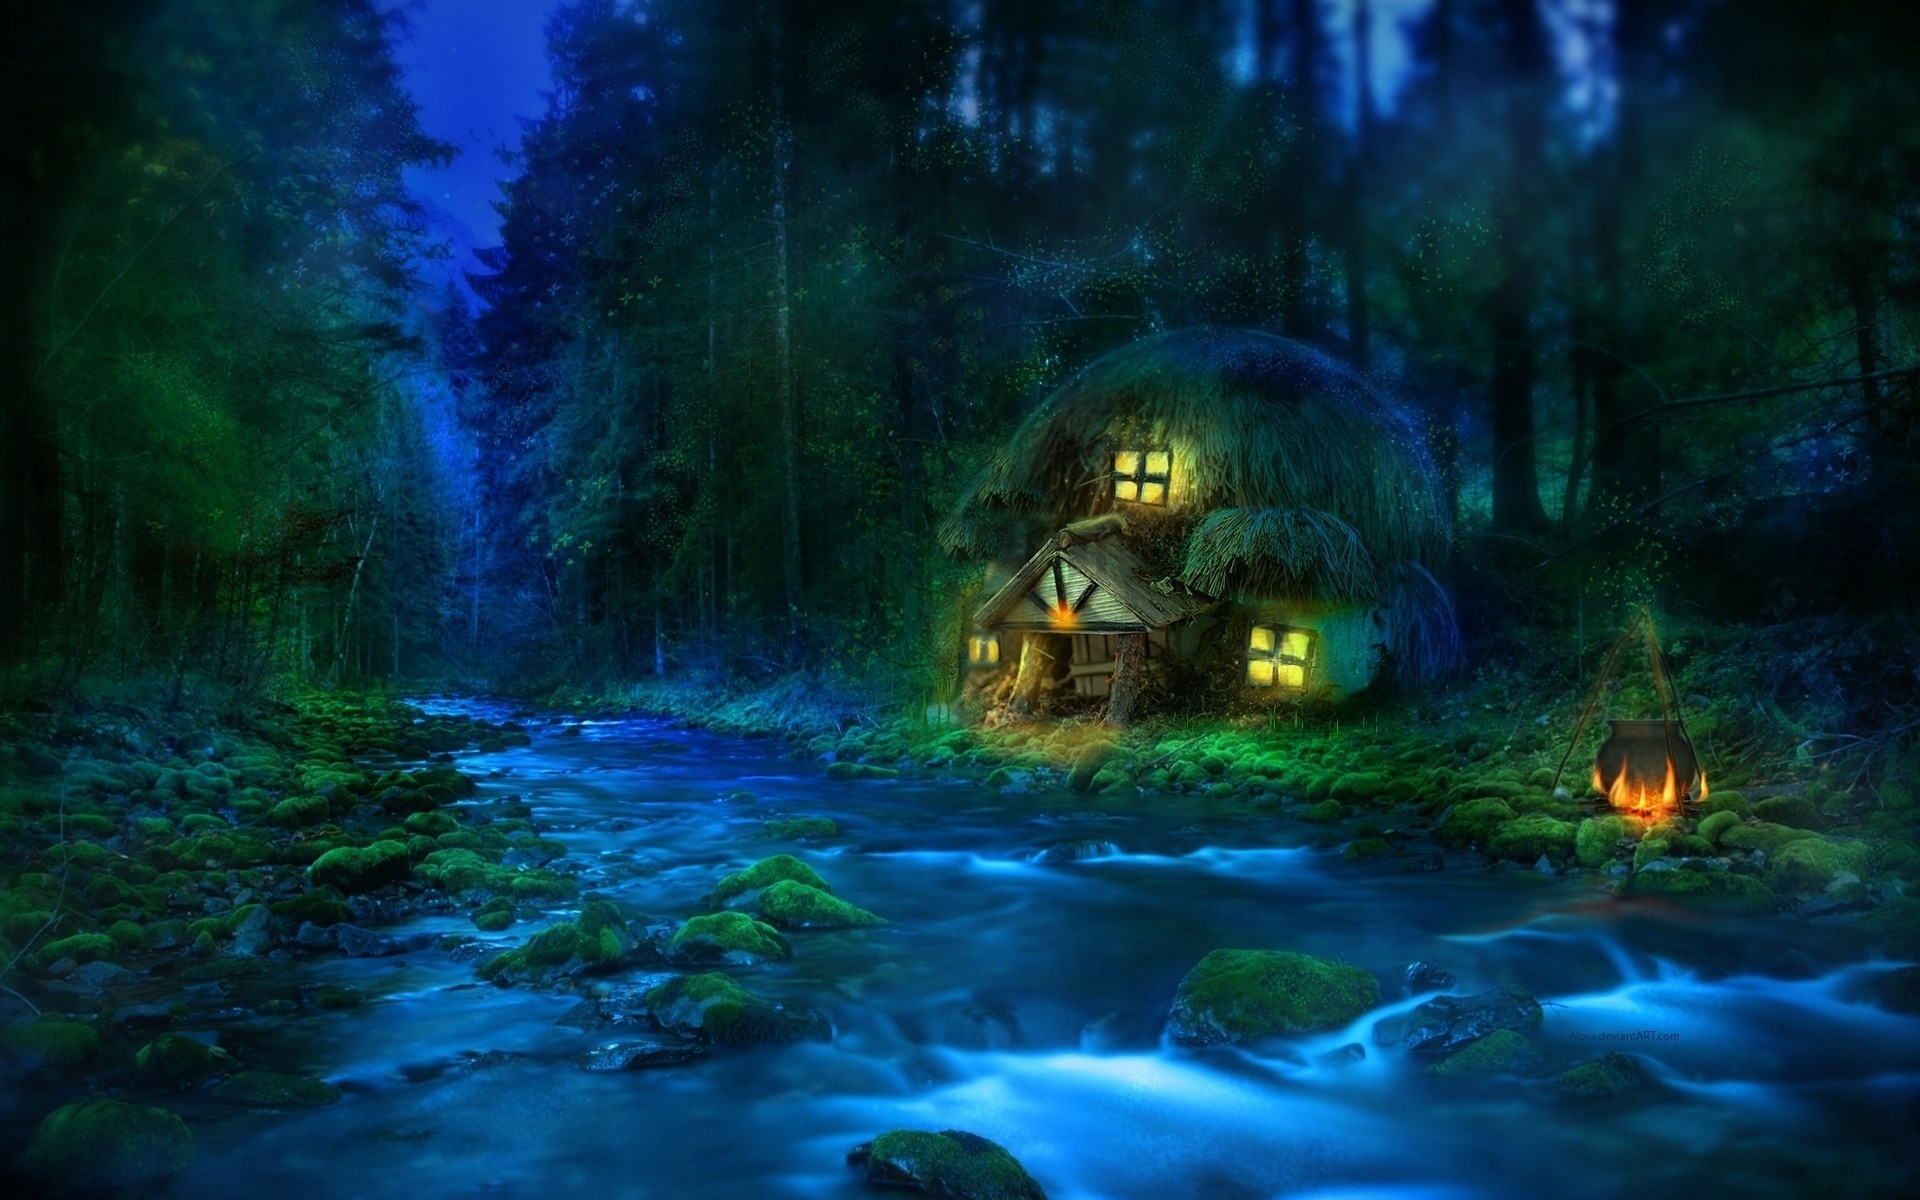 fantasy, Art, Landscapes, Rivers, Trees, Lotr, Lord, Rings, House Wallpaper